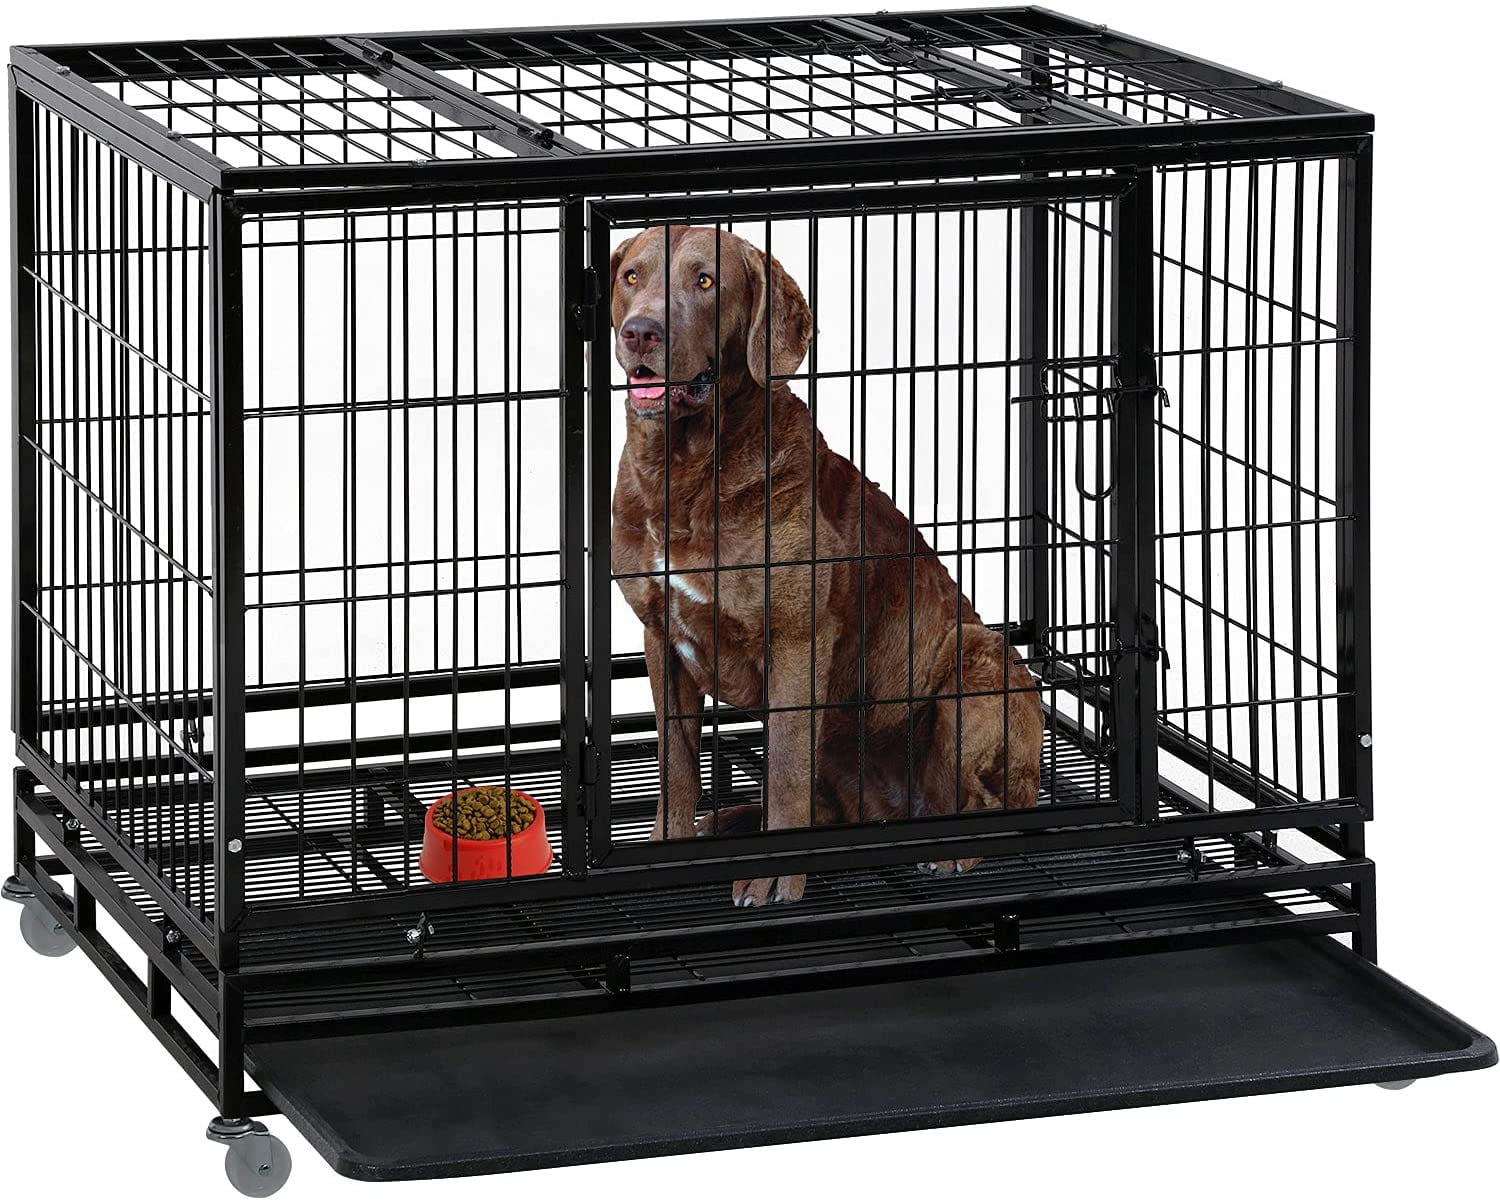 Bestpet 36 Dog Crate Cage For Large Dogs Heavy Duty Dog Kennel Pet